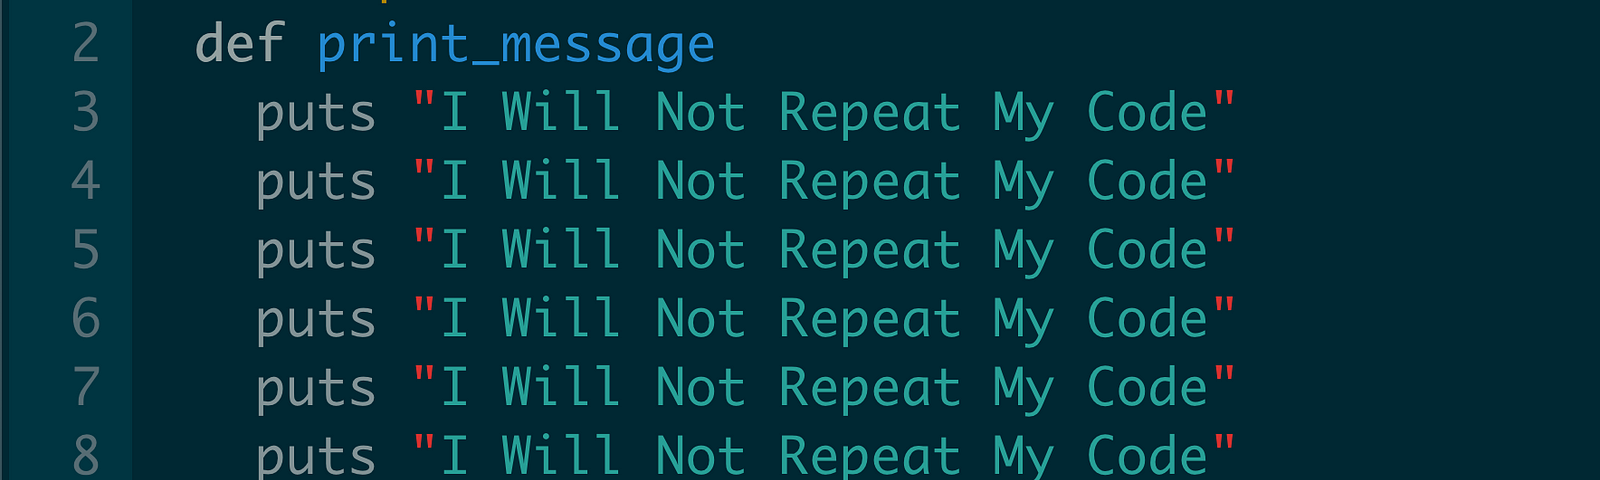 A method where "I will not repeat my code" is printed a lot of times manually